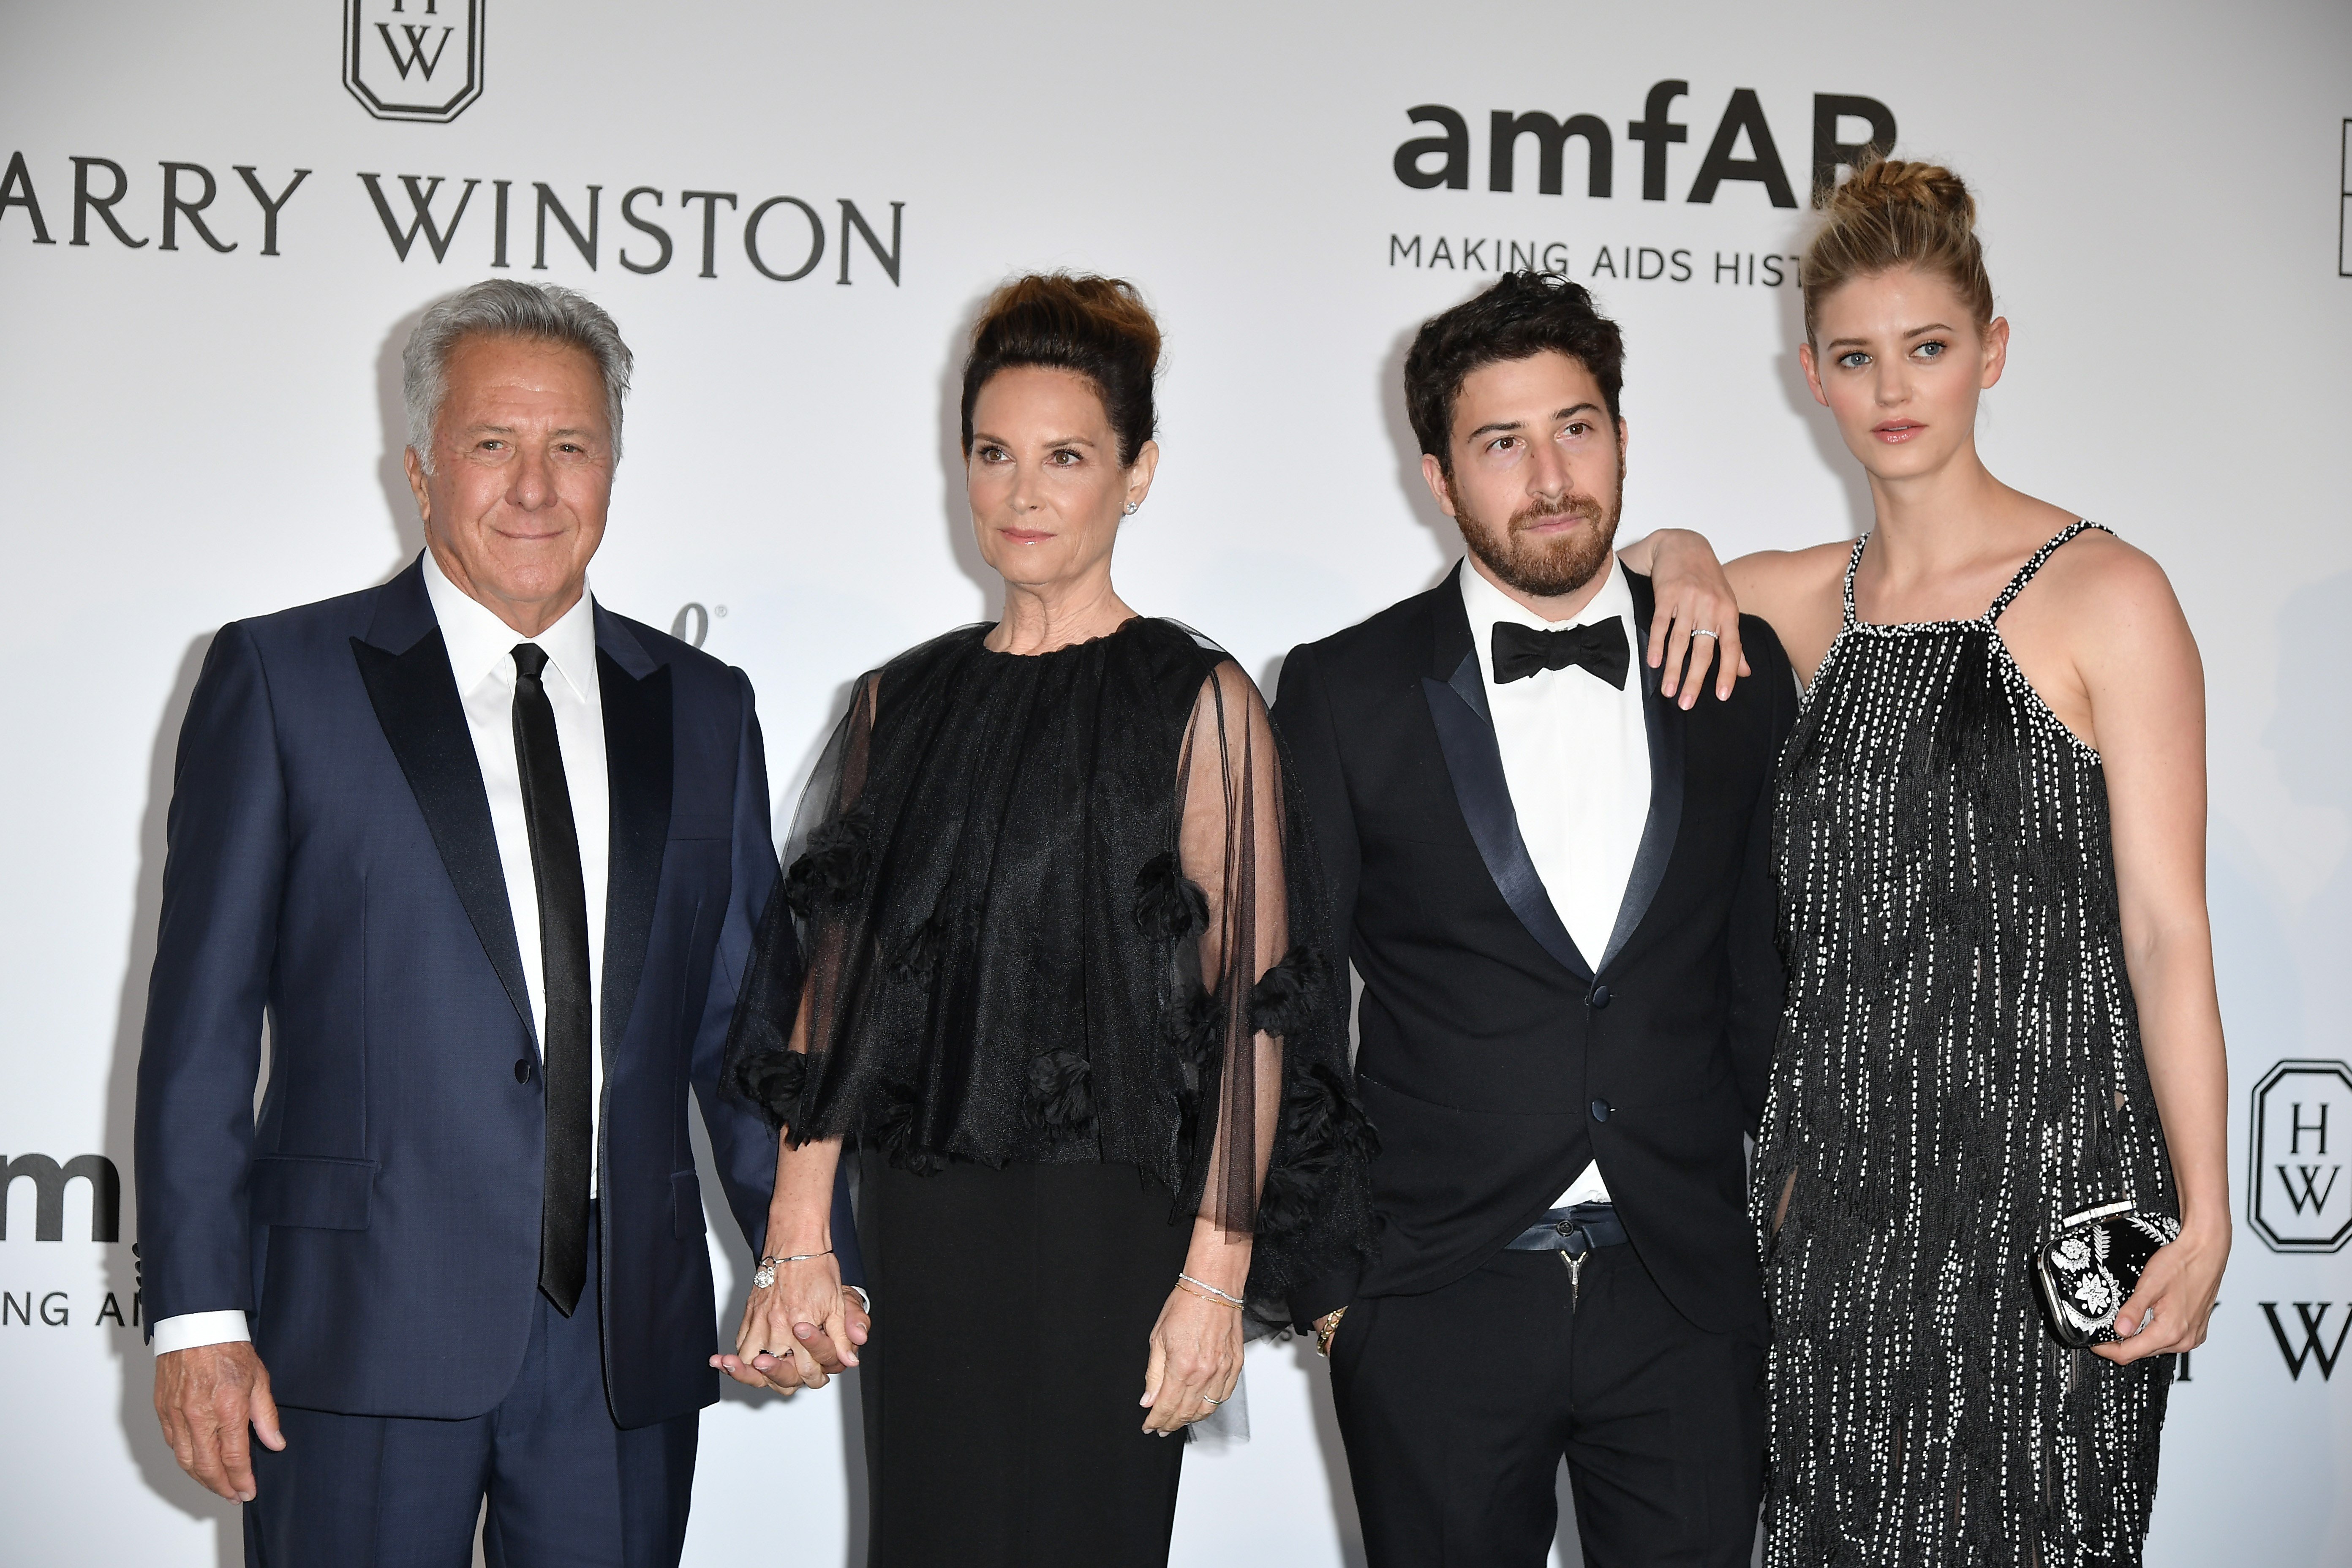 Jake Hoffman, Jenna Kelly, Lisa Hoffman and Dustin Hoffman attend the Amfar Gala at Hotel du Cap-Eden-Roc in Cap d'Antibes, France on May 26, 2017. | Source: Getty Images 